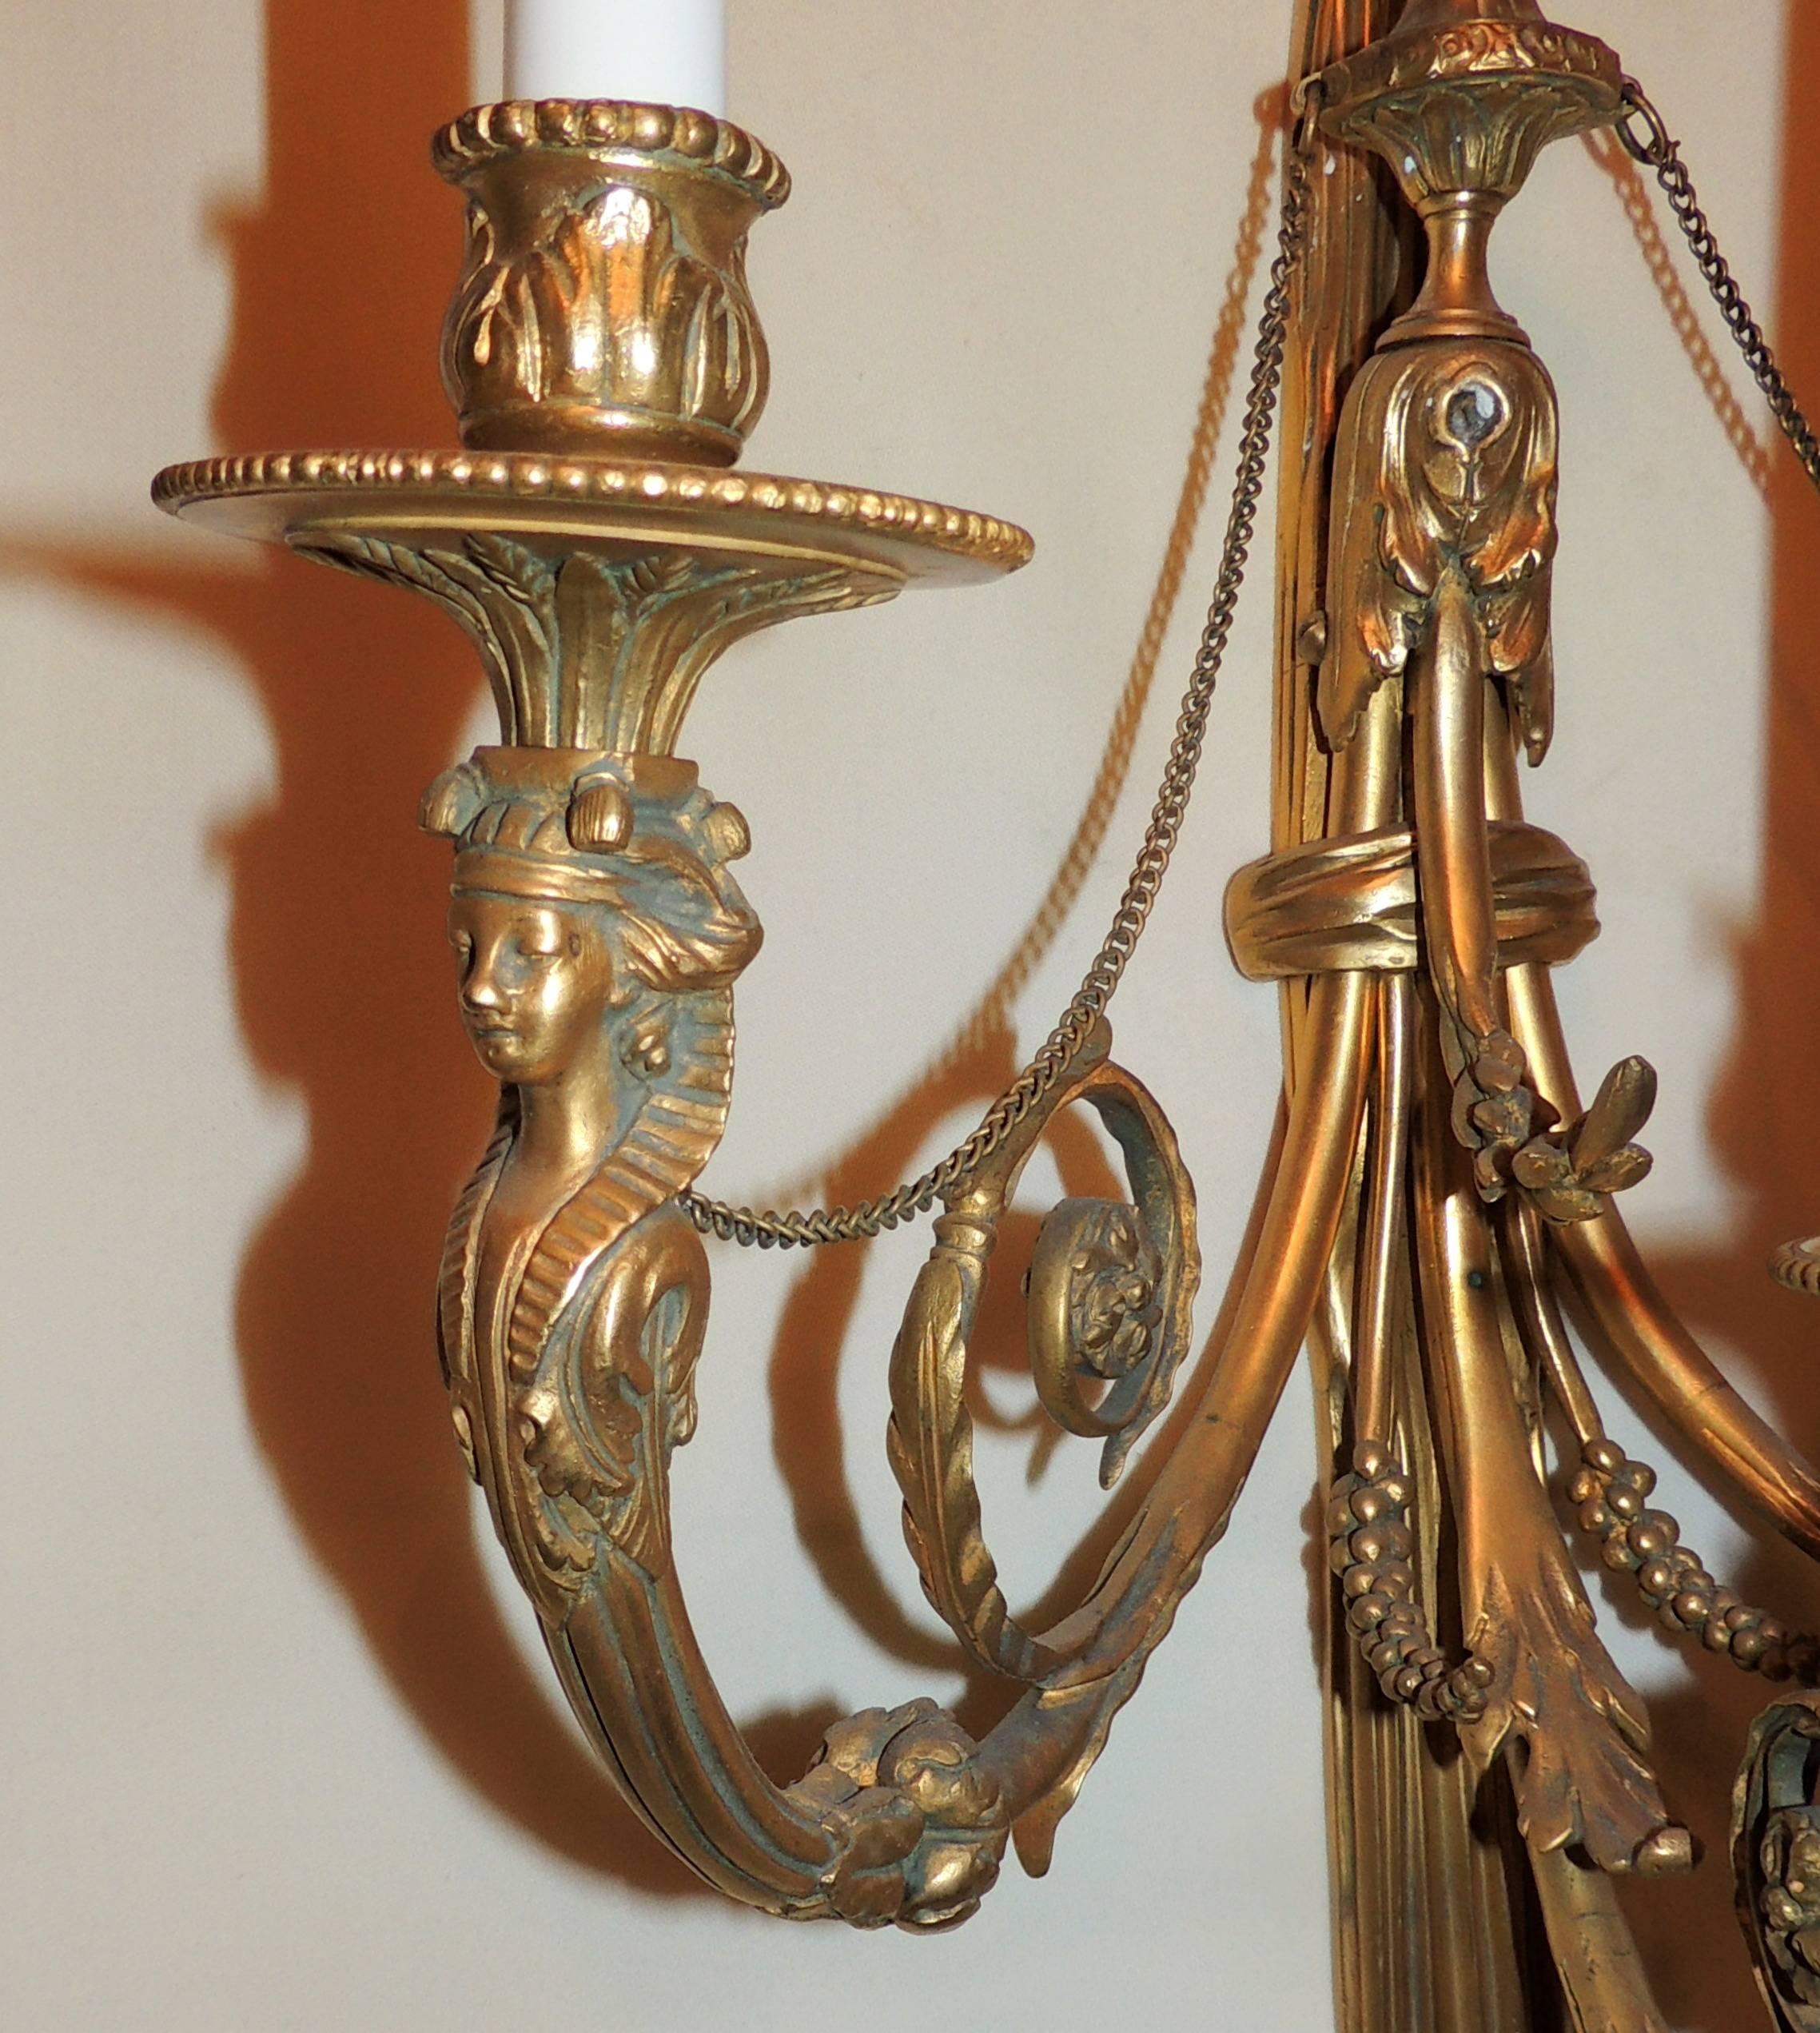 A wonderful pair of French doré bronze Regency neoclassical lady figural three-light Empire large tassel wall sconces these sconces have completely been redone and come ready to install.